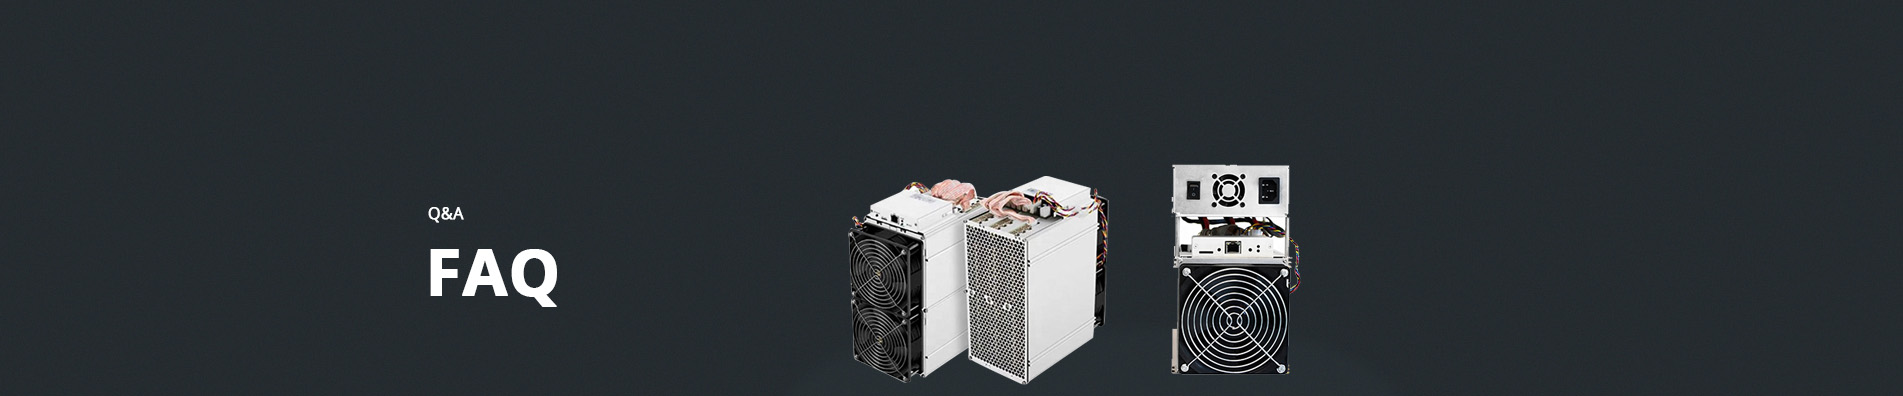 new mining graphics cards